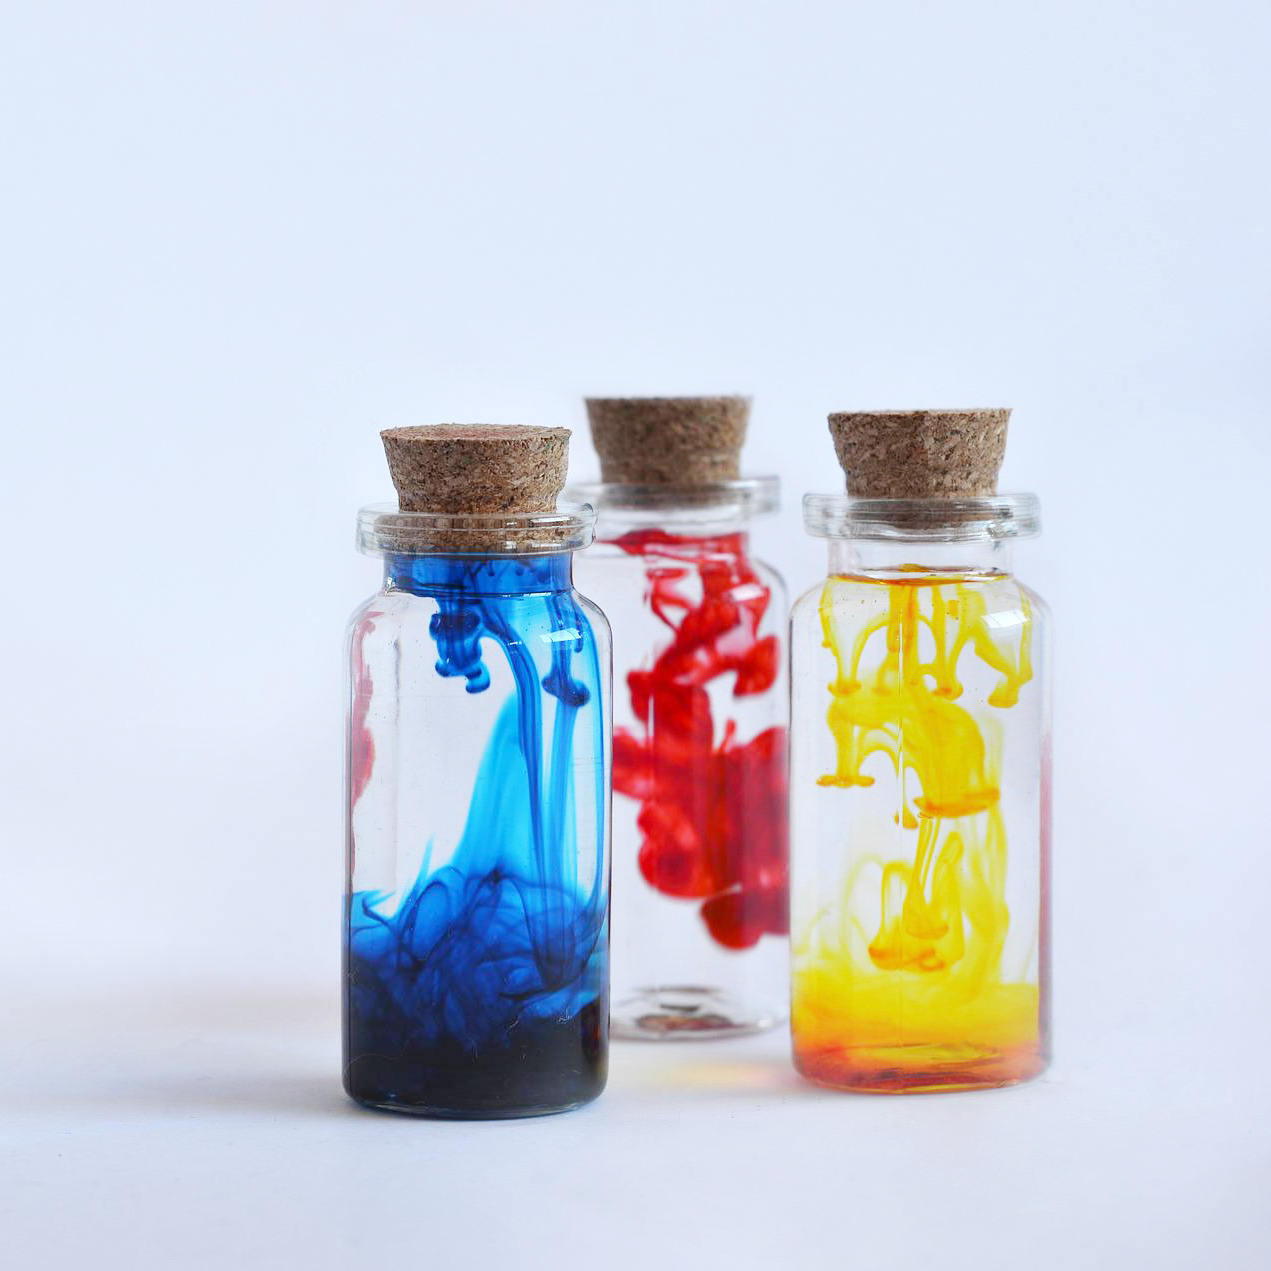 Three small glass bottles with colored liquid inside for National Chemistry Week